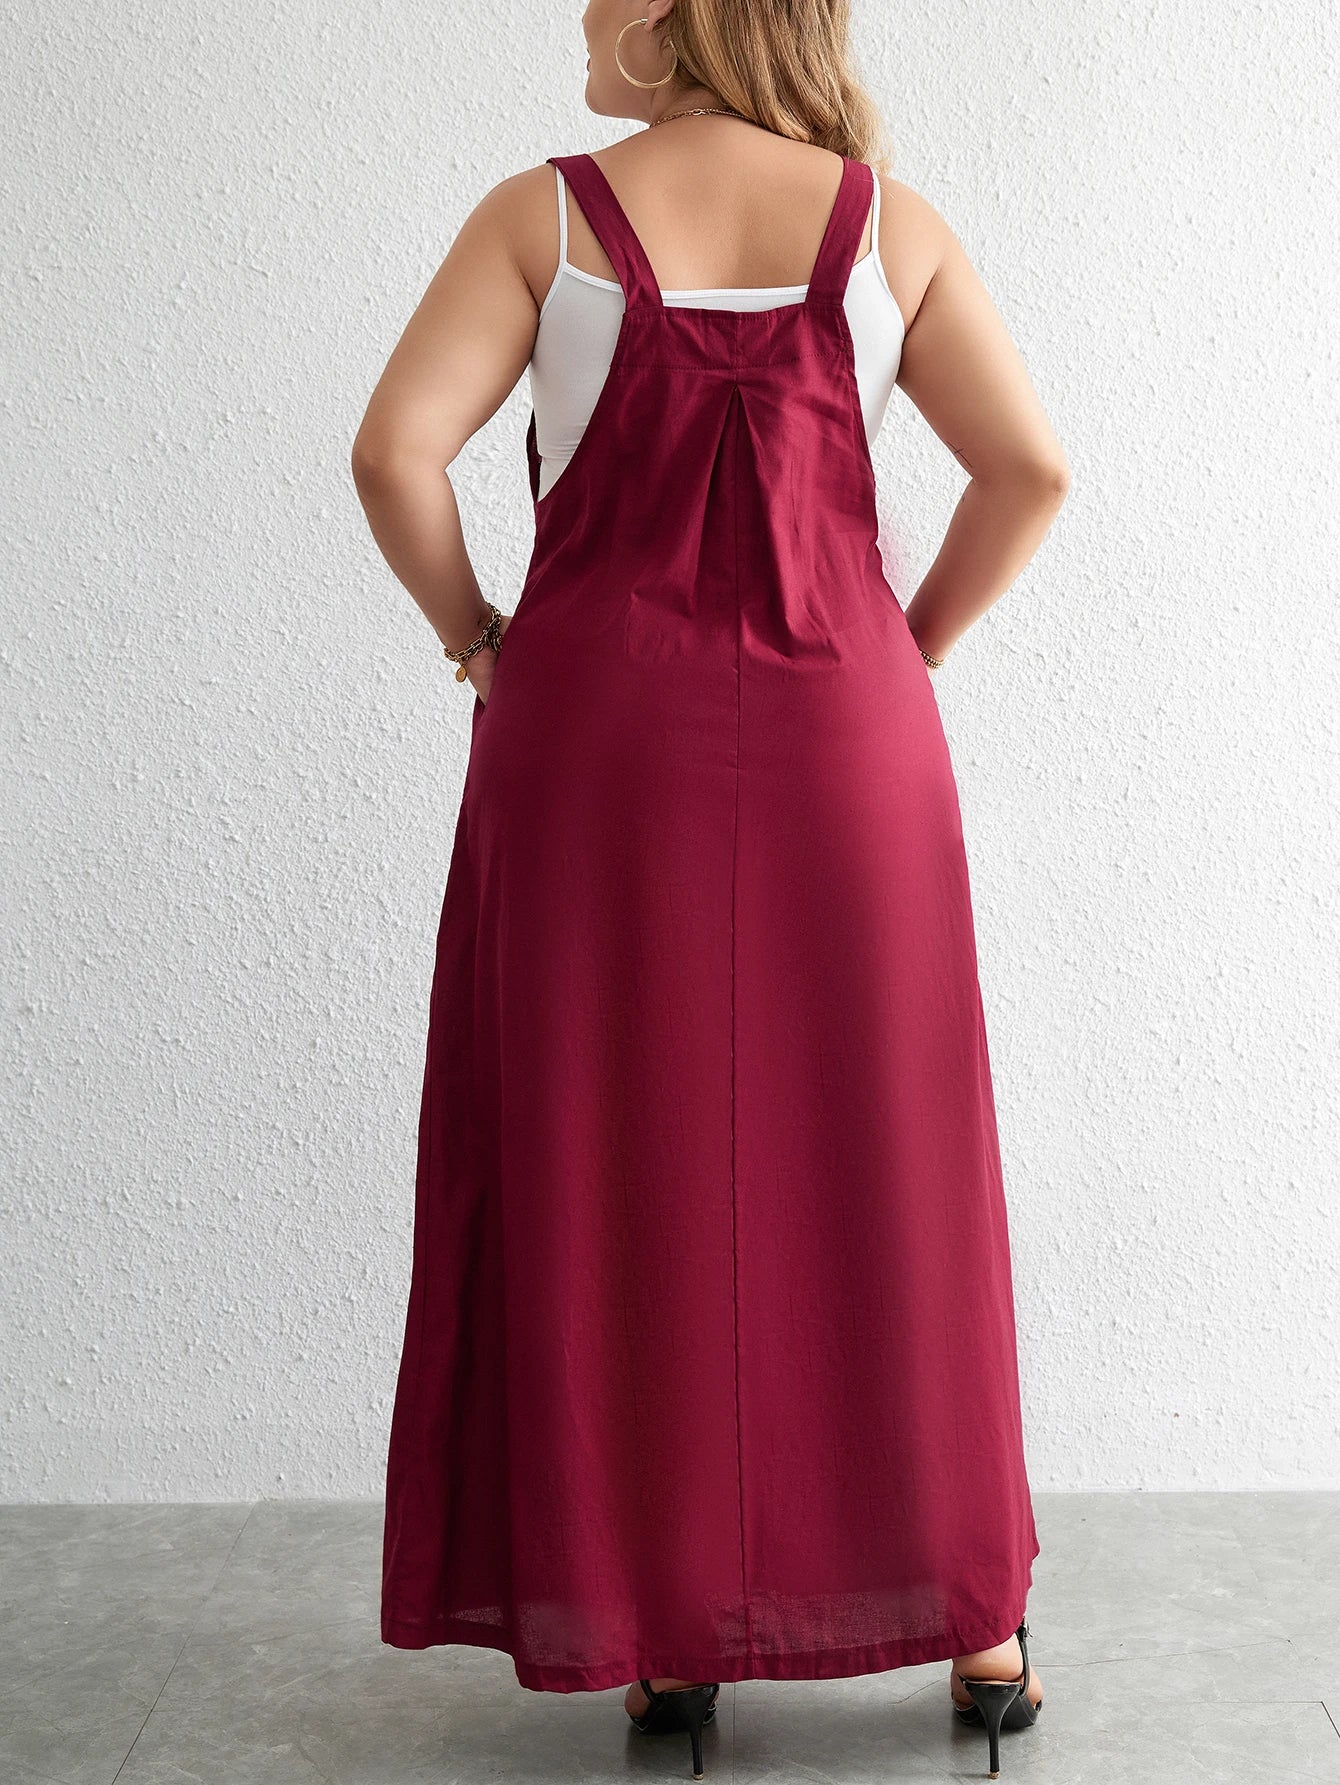 Plus Size Cotton Dress Woman 2024 Summer Sleevless Solid Casual Strap Tank Dress Red Pockets Big Curvy Size Maxi Long Dresses